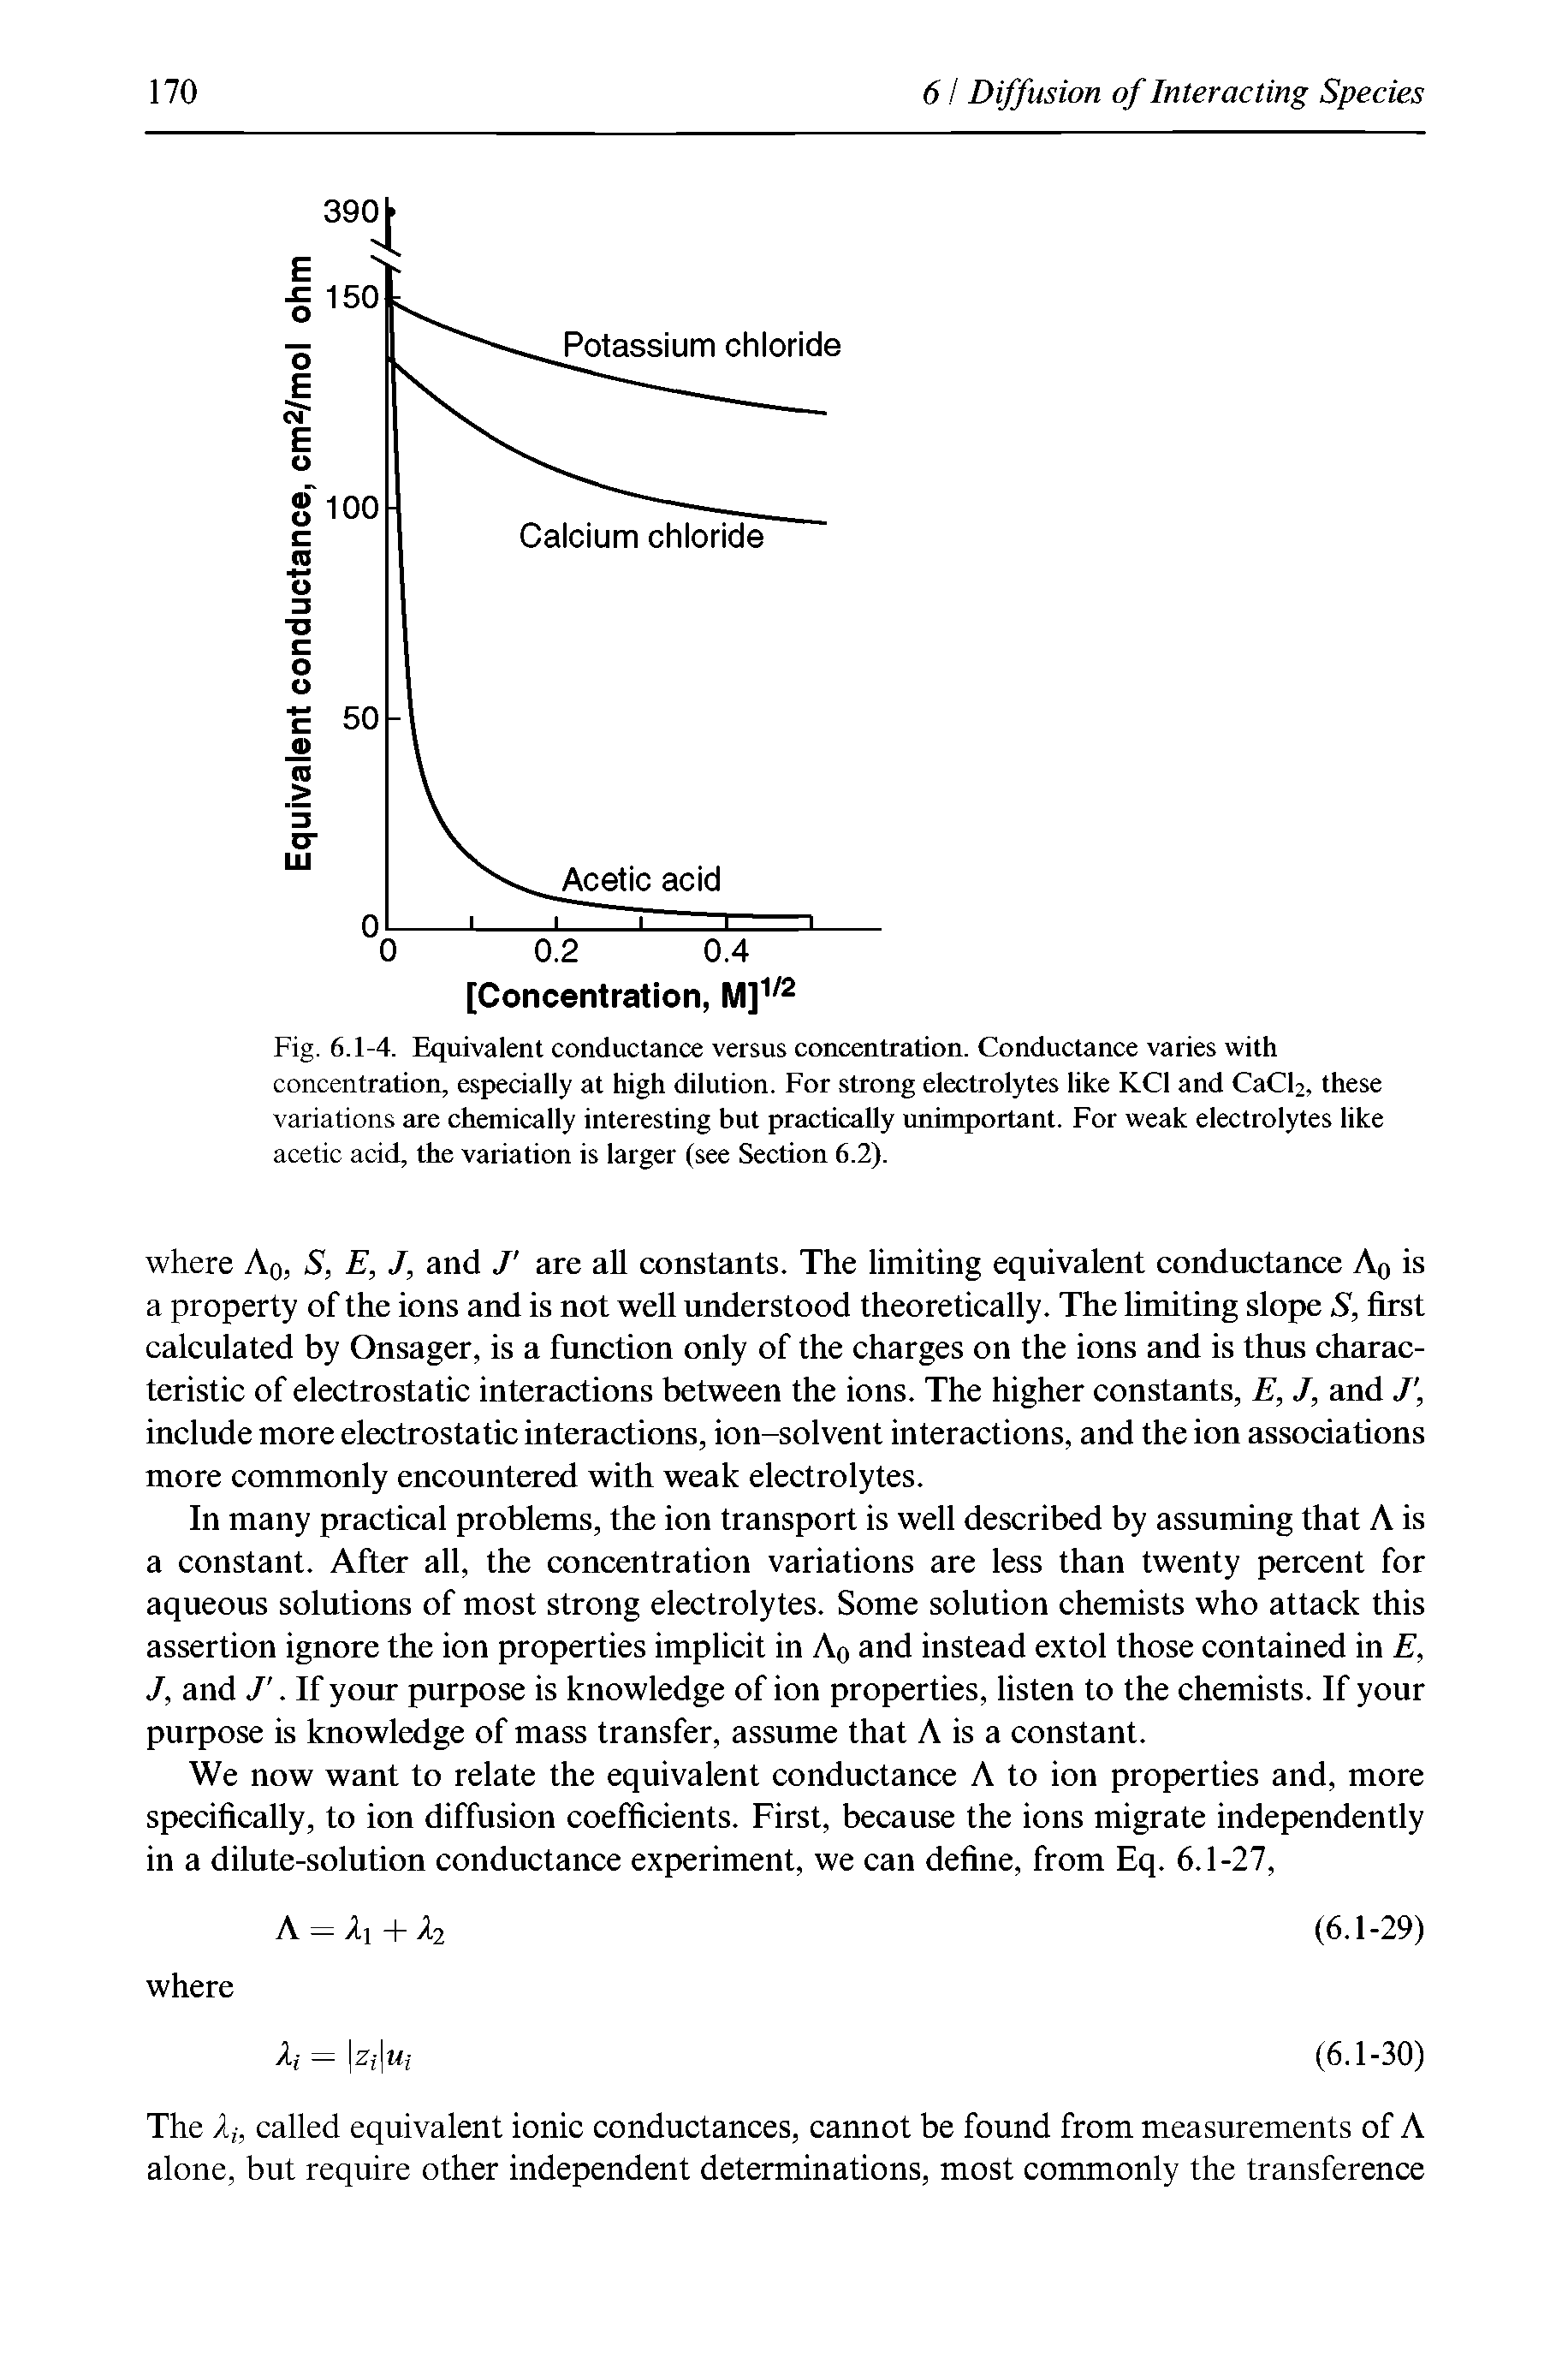 Fig. 6.1-4. Equivalent conductance versus concentration. Conductance varies with concentration, especially at high dilution. For strong electrolytes like KCI and CaCh, these variations are chemically interesting but practically unimportant. For weak electrolytes like acetic acid, the variation is larger (see Section 6.2).